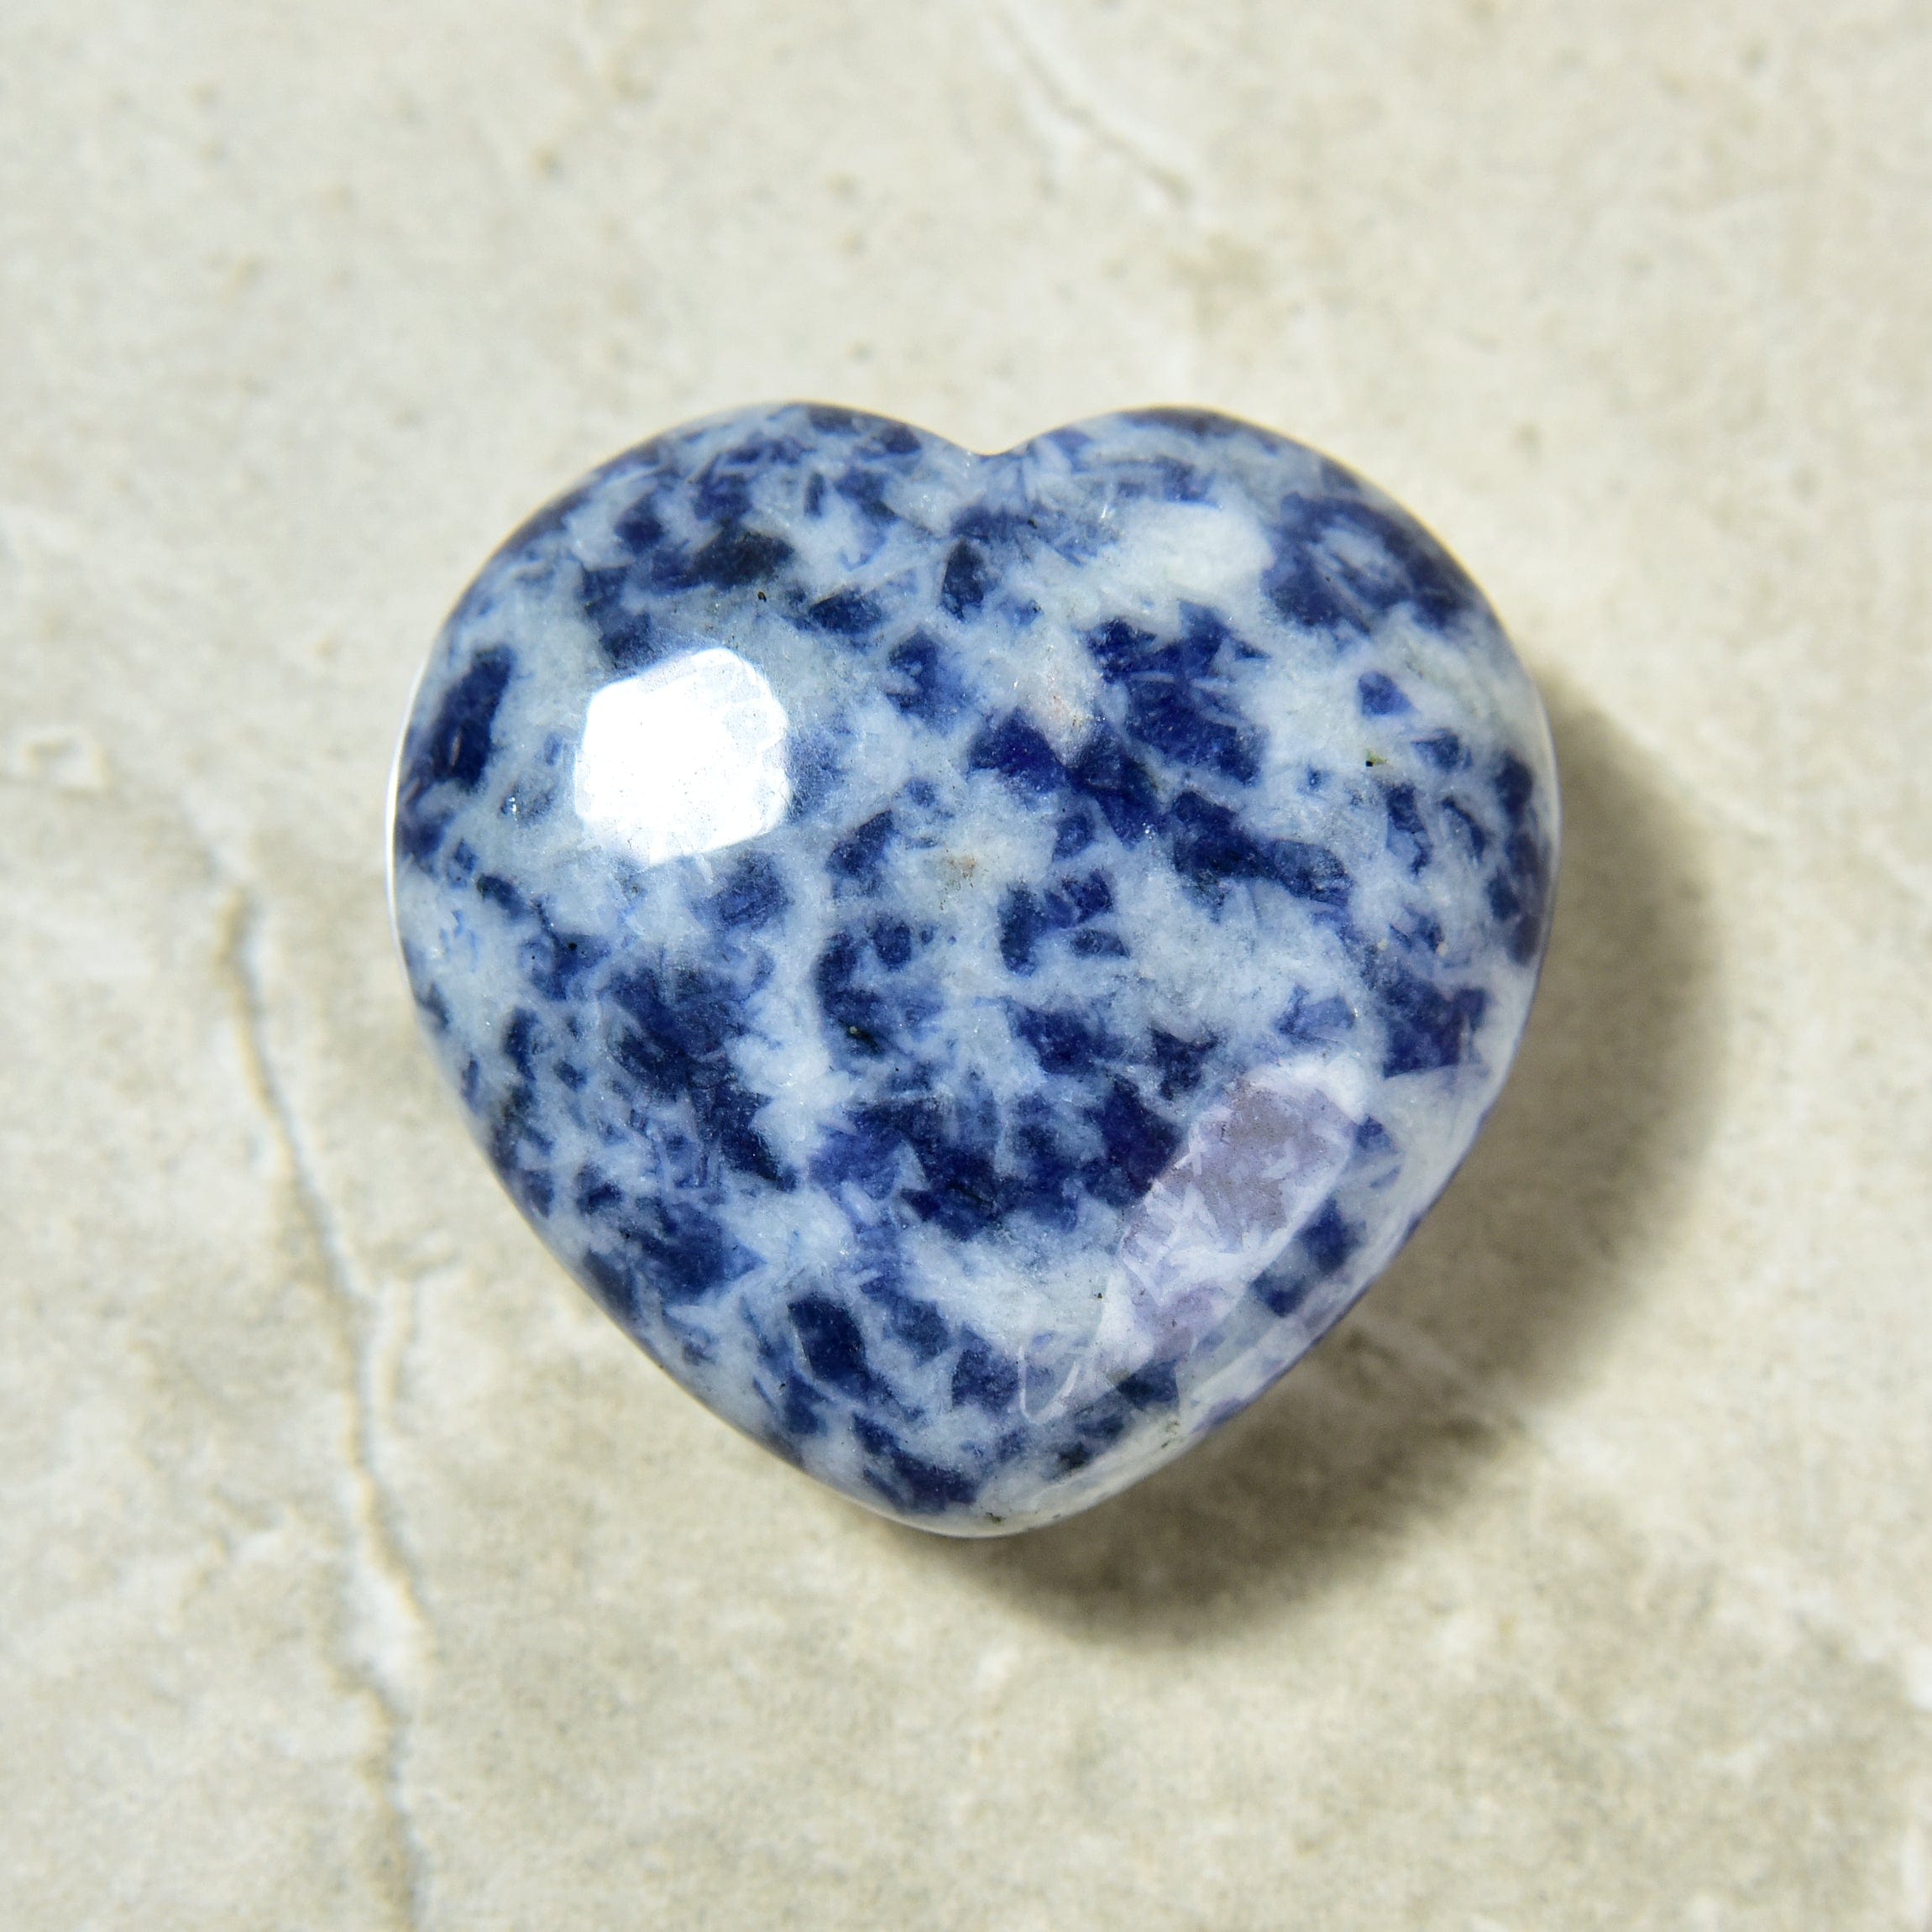 Kalifano Gemstone Carvings Sodalite Heart Carving GH40-SD